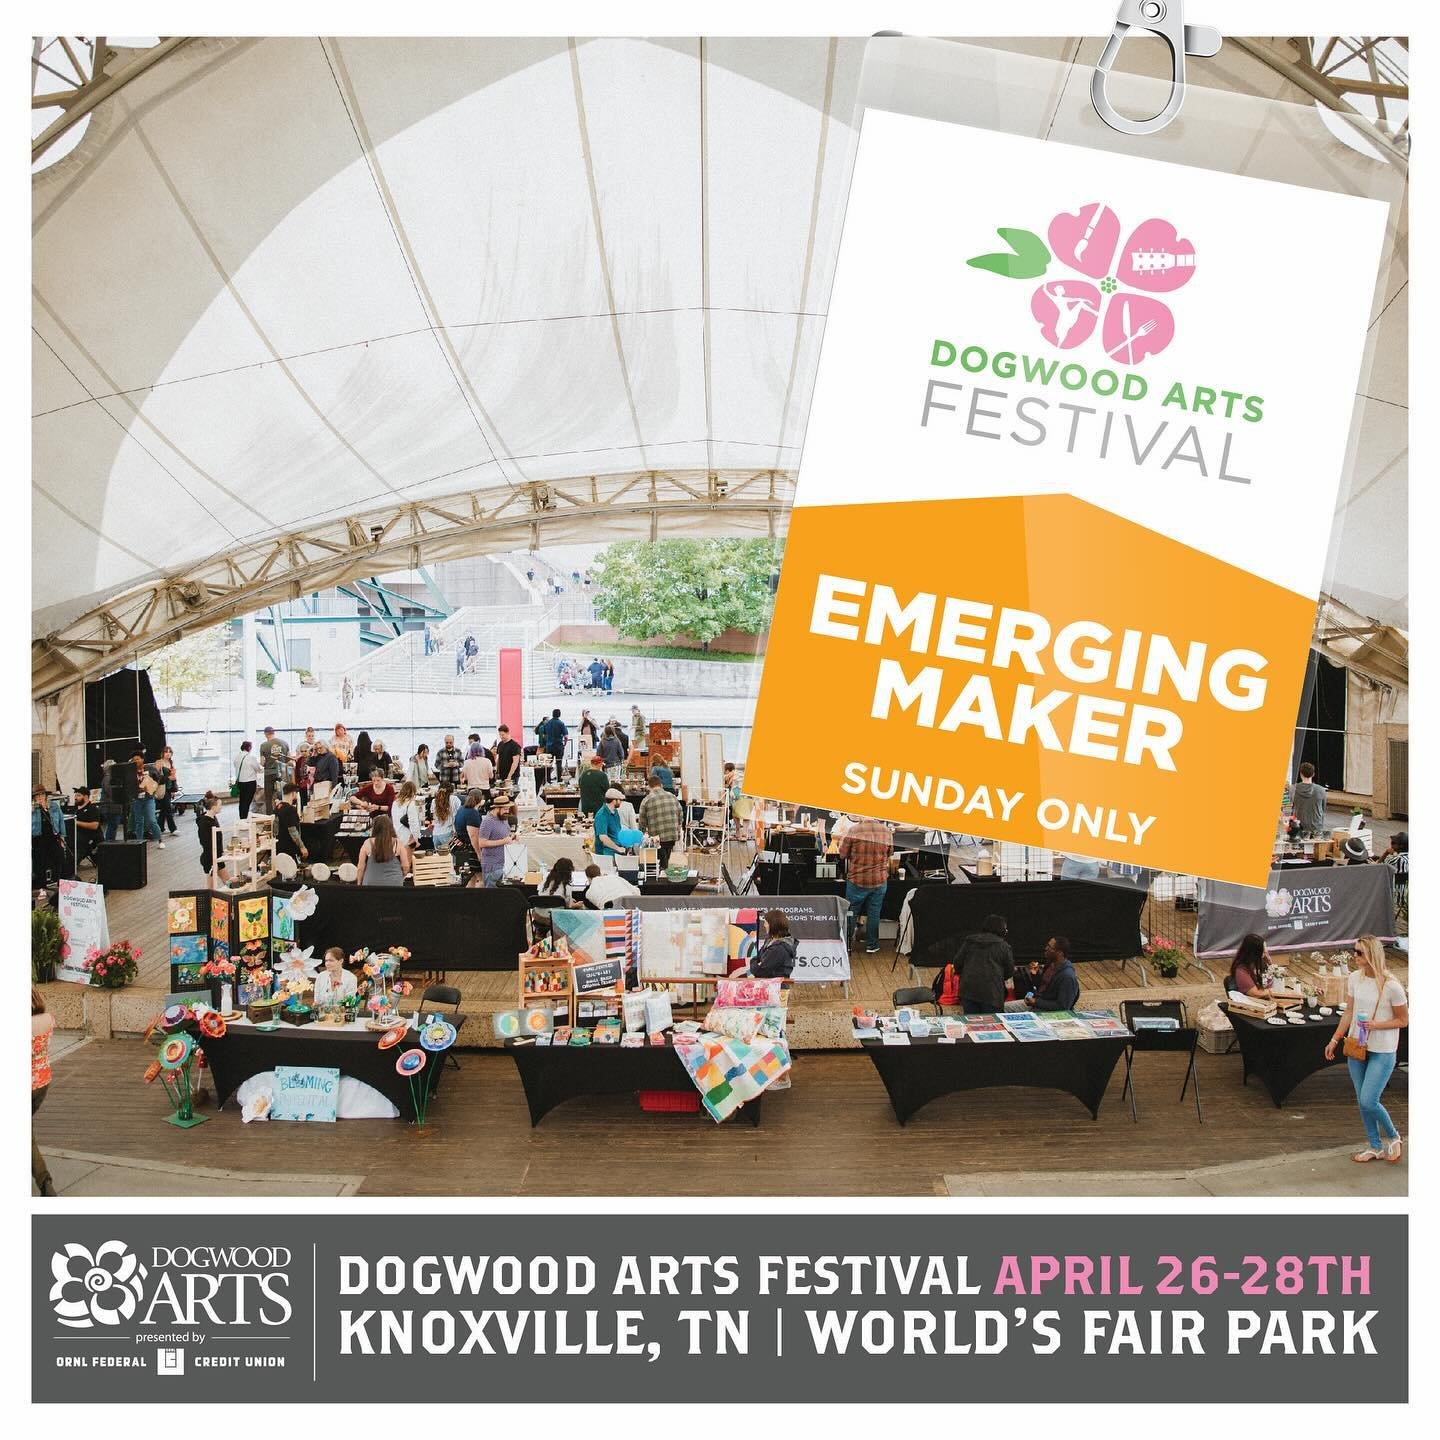 I&rsquo;ll be at the Emerging Makers Tent at the Dogwood Arts Festival
on Sunday, April 28th in the World&rsquo;s Fair World&rsquo;s Park Amphitheatre from 10AM-5PM Event Details &rarr; https://bit.ly/DAF_2024 | @dogwoodarts